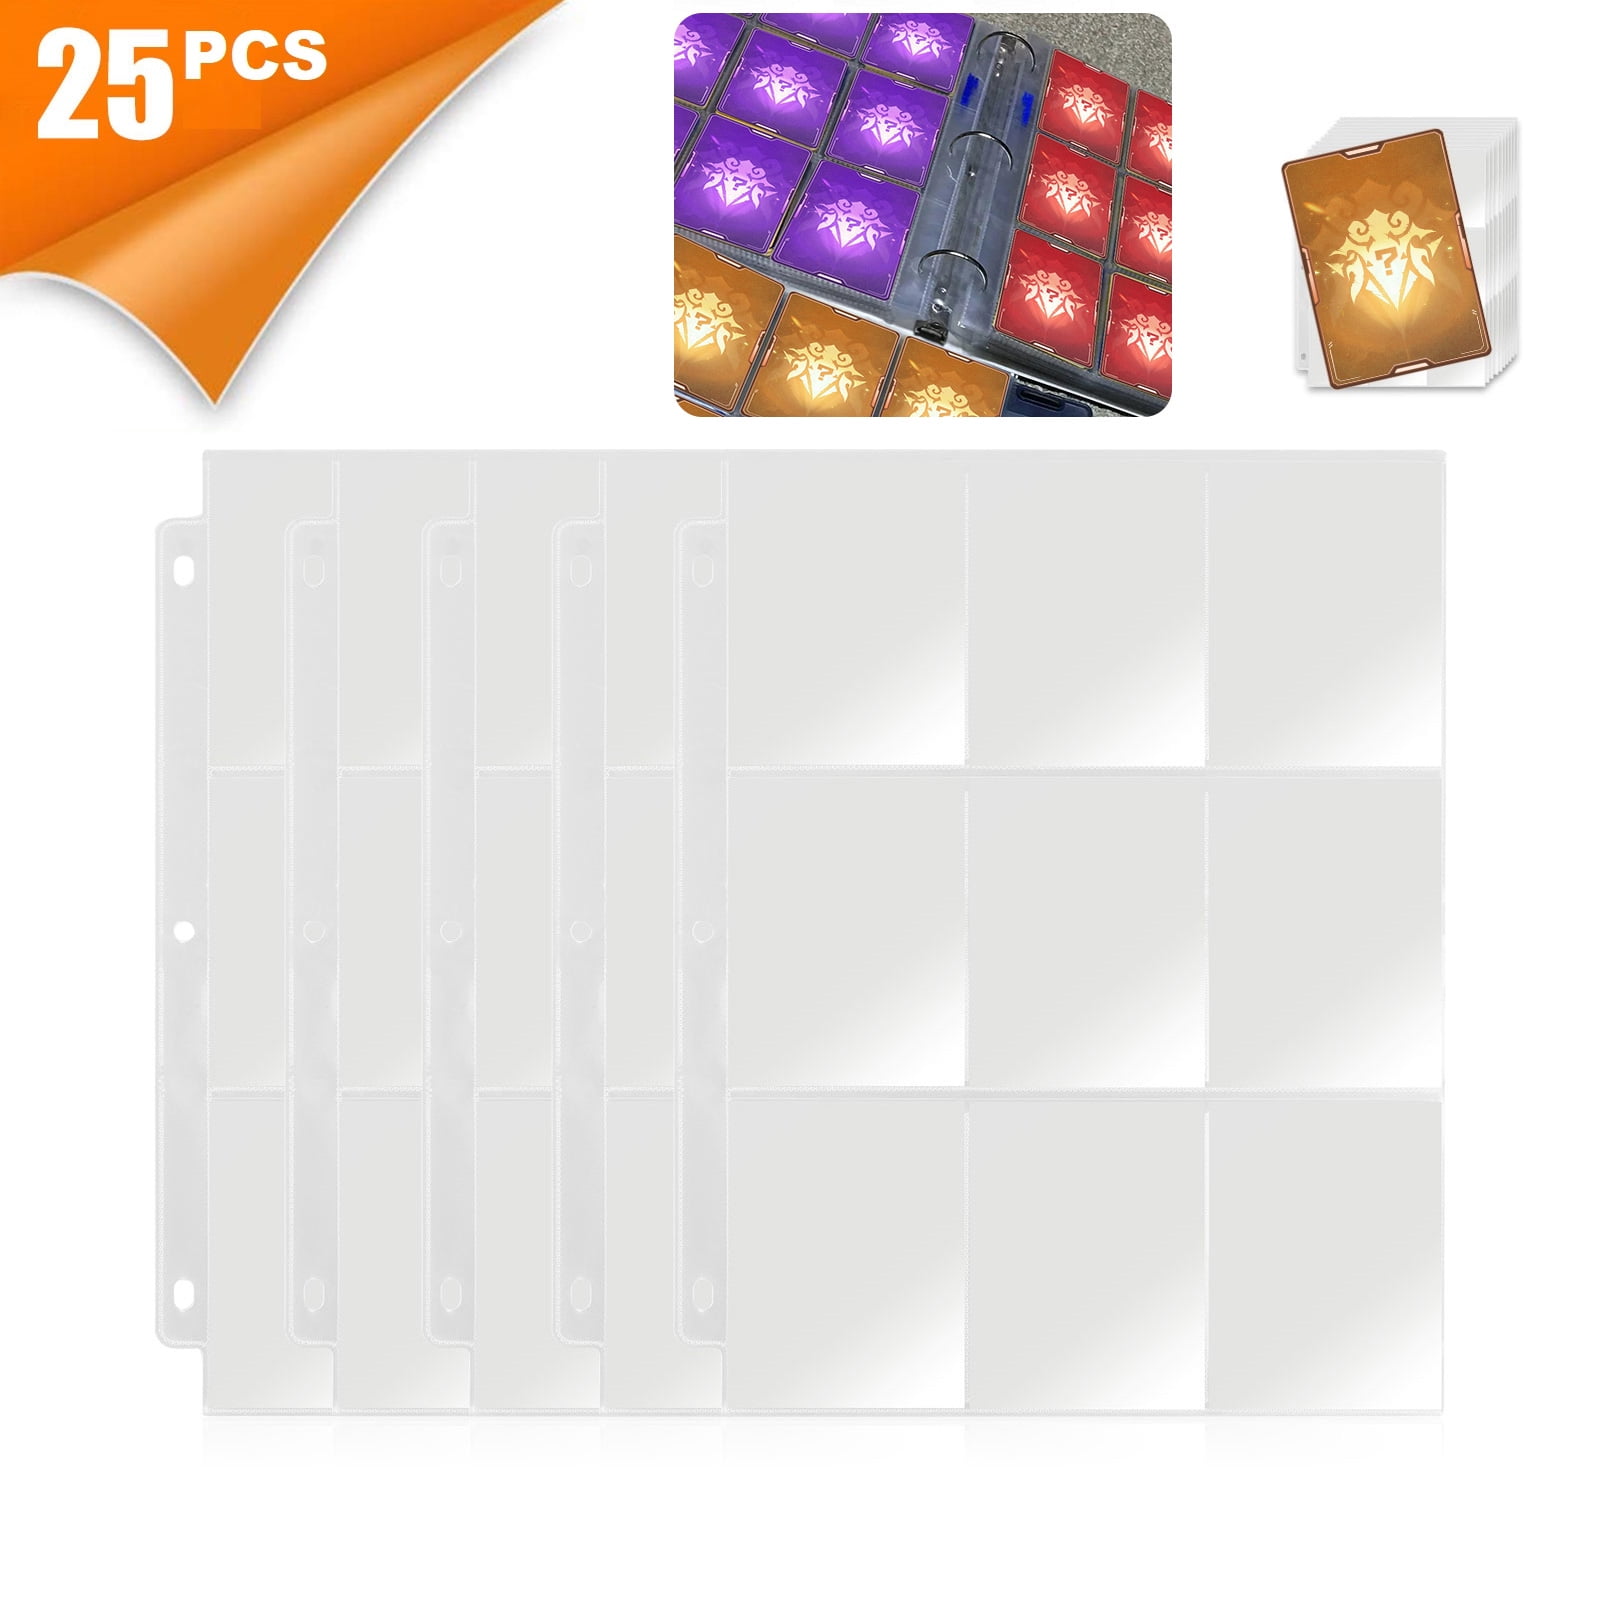 CheckOutStore 25 Clear 9 Pocket Trading Card Page Protectors